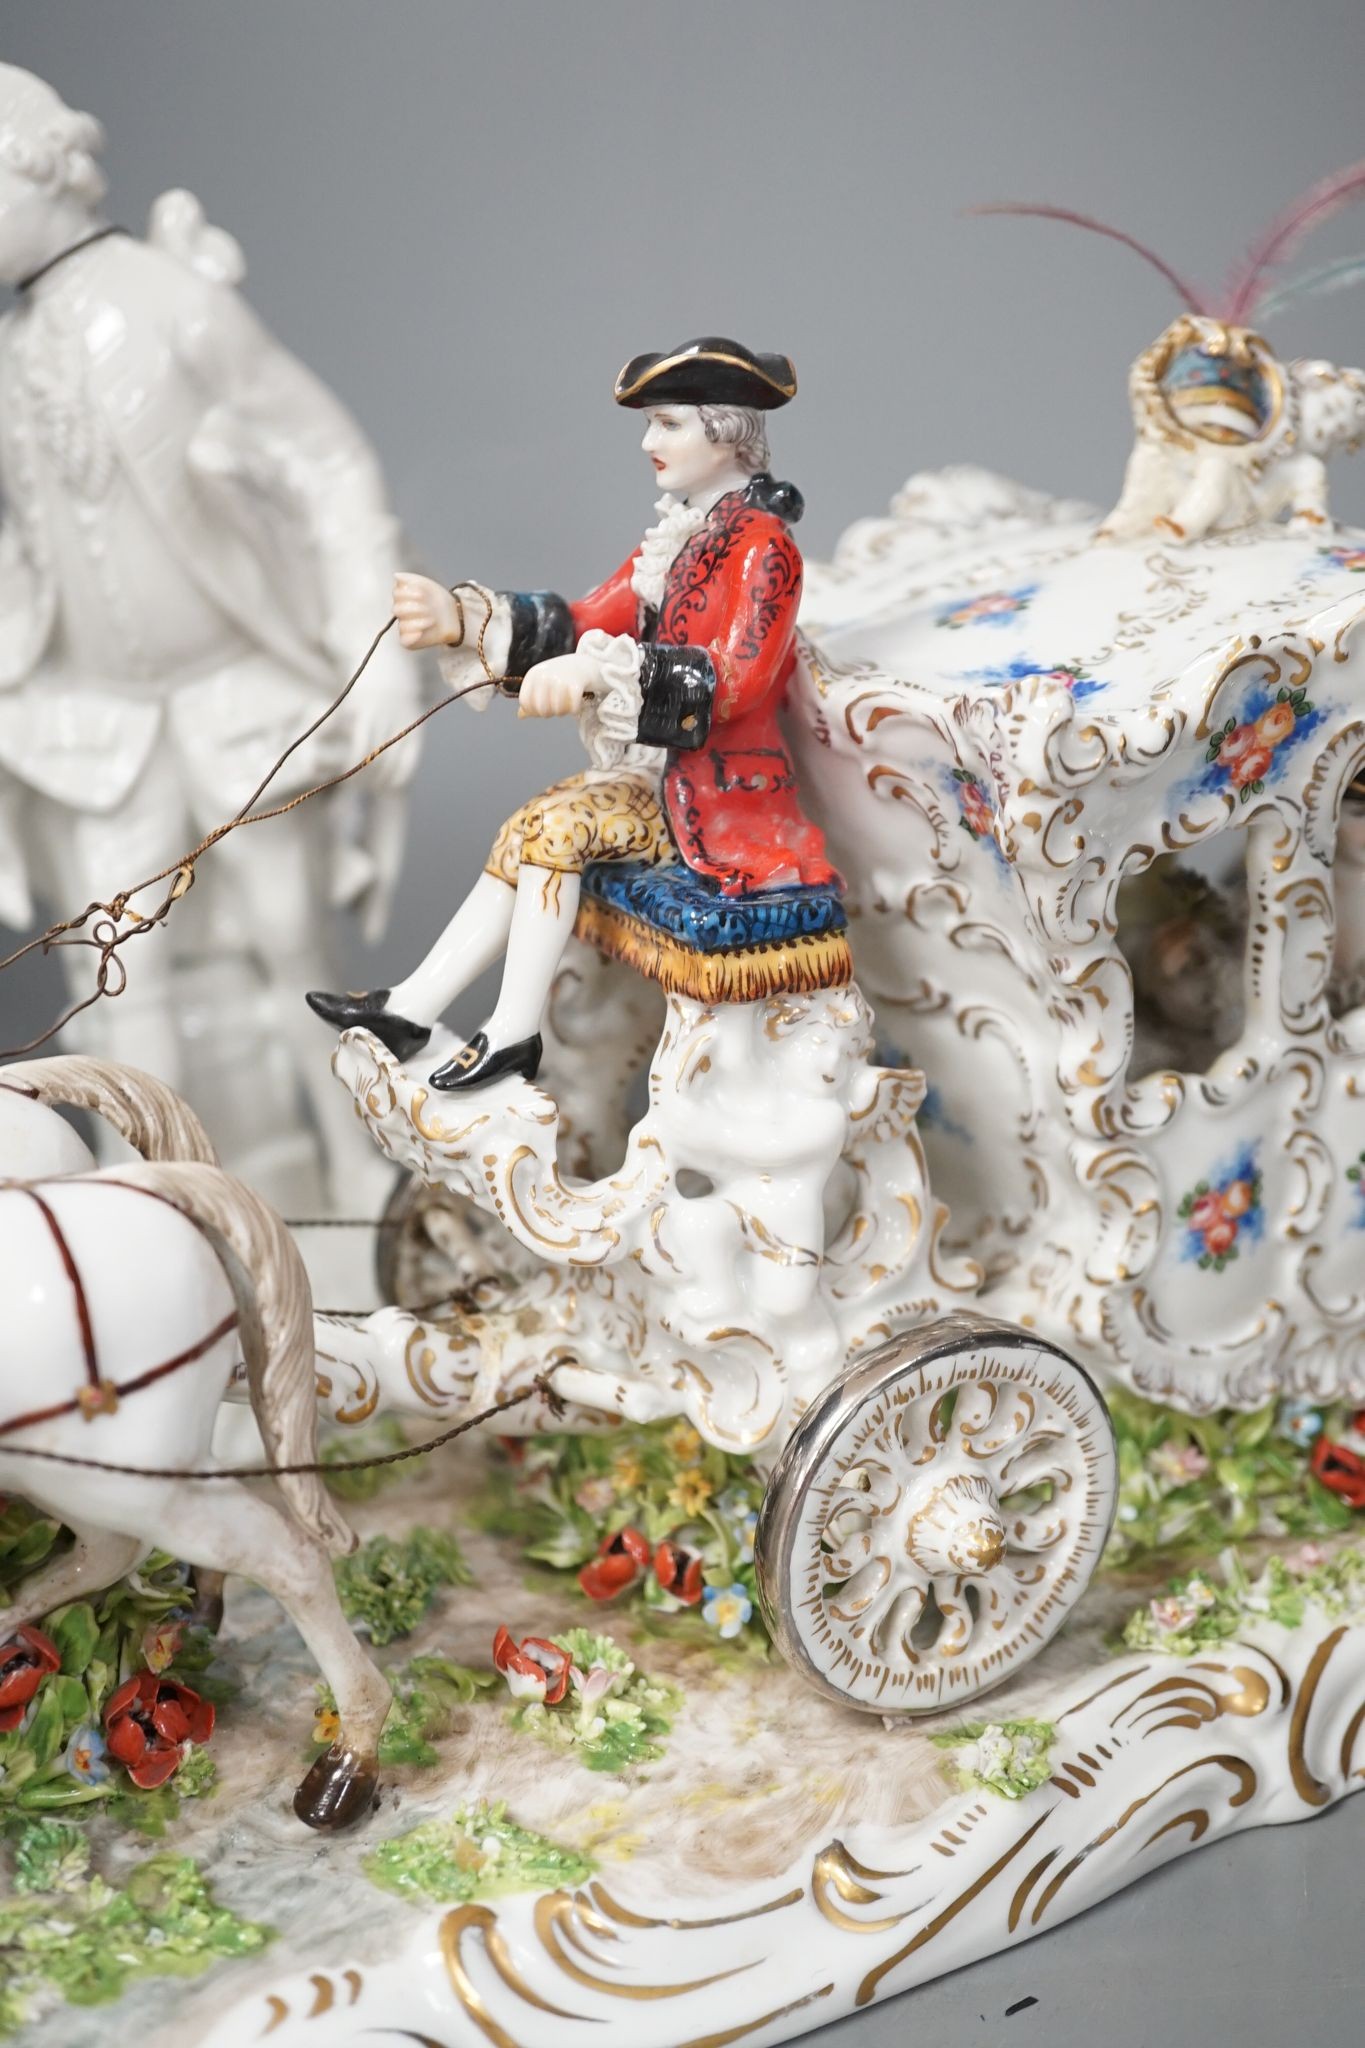 A large Italian porcelain carriage group and a pair of Italian white porcelain figure of a lady and a man 54cm